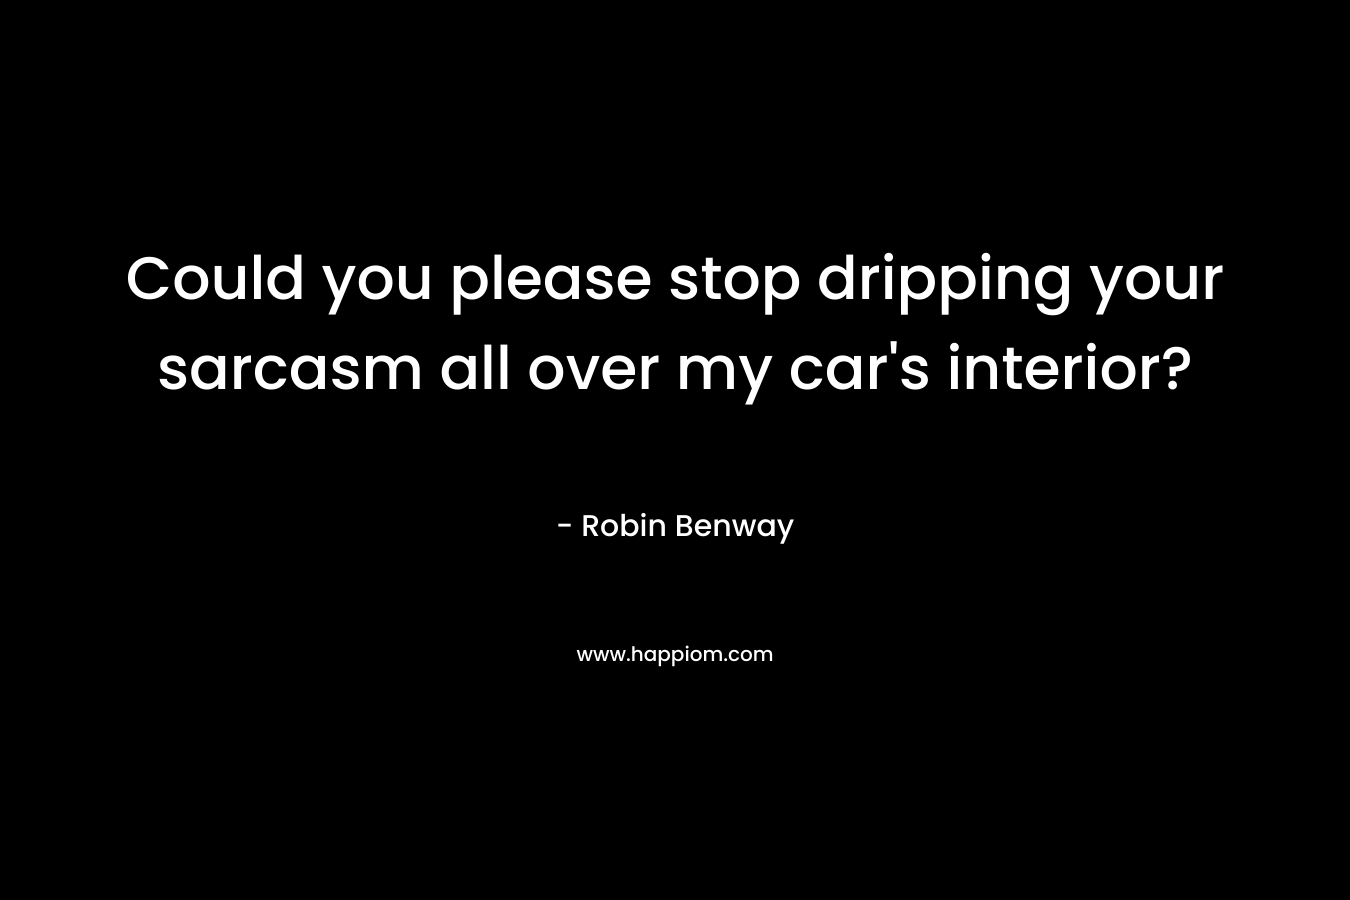 Could you please stop dripping your sarcasm all over my car’s interior? – Robin Benway